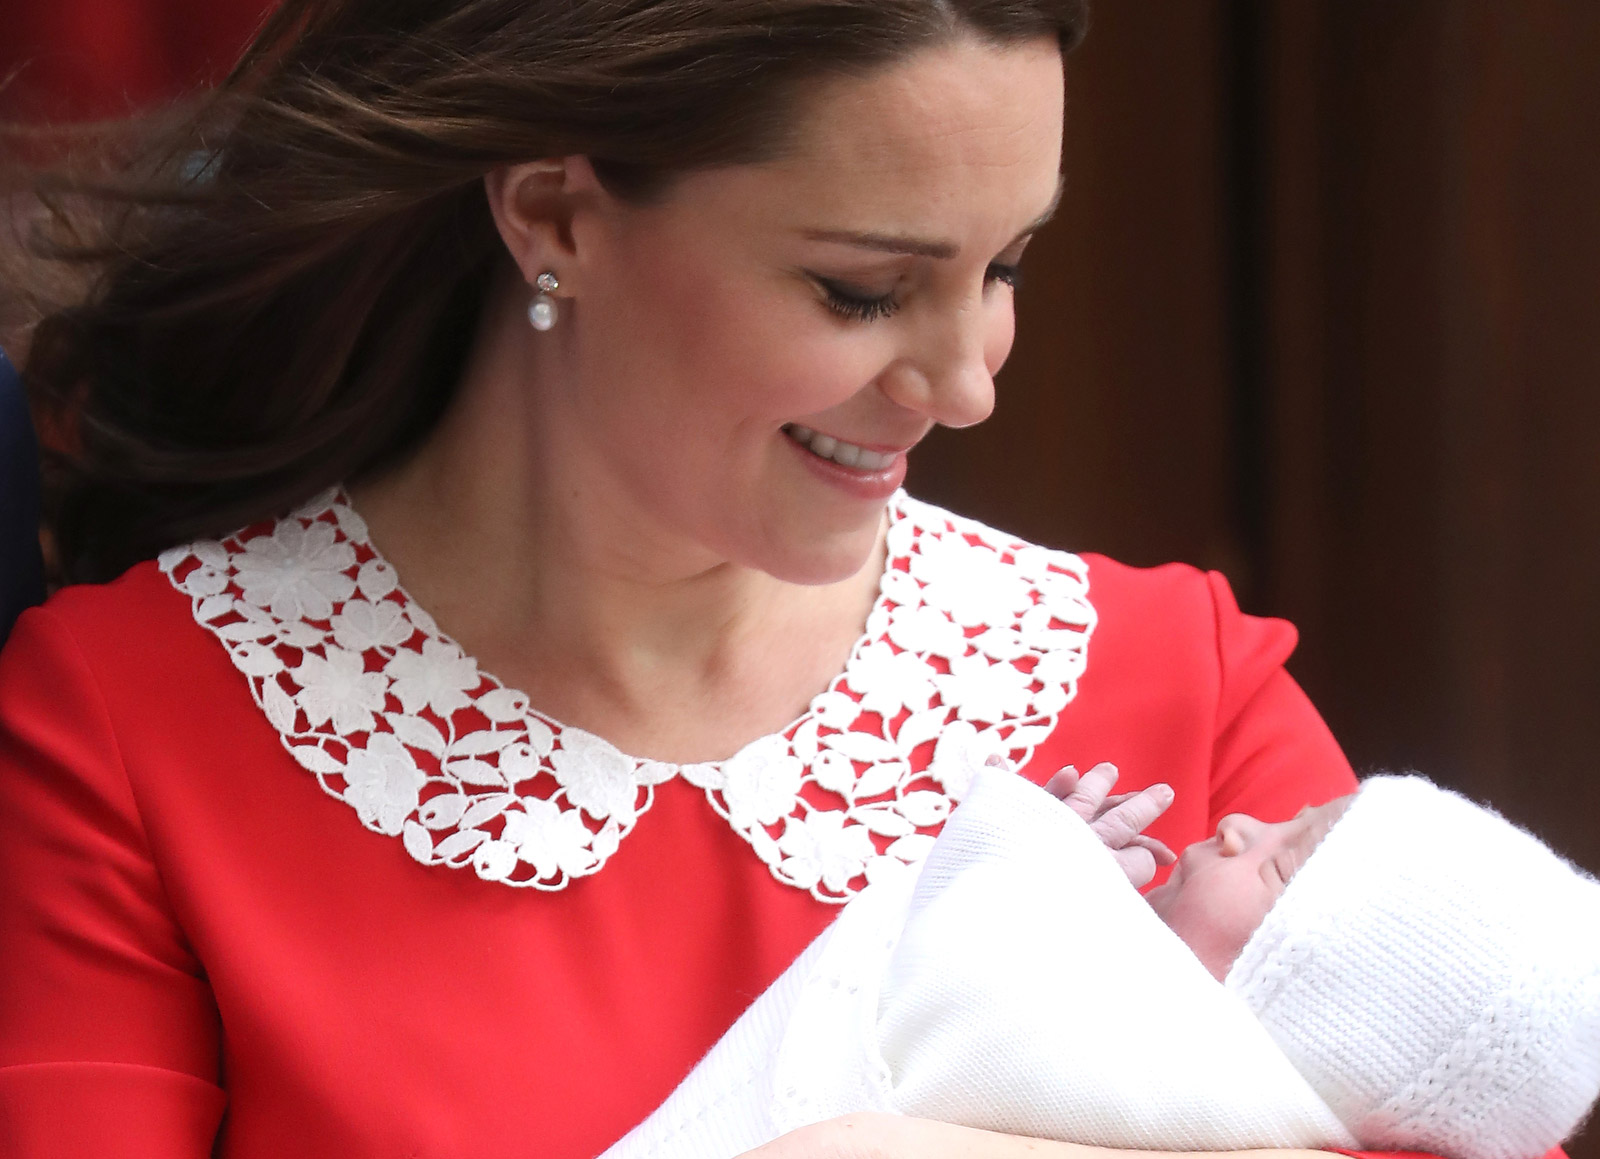 It's a boy! Photos of the royal baby